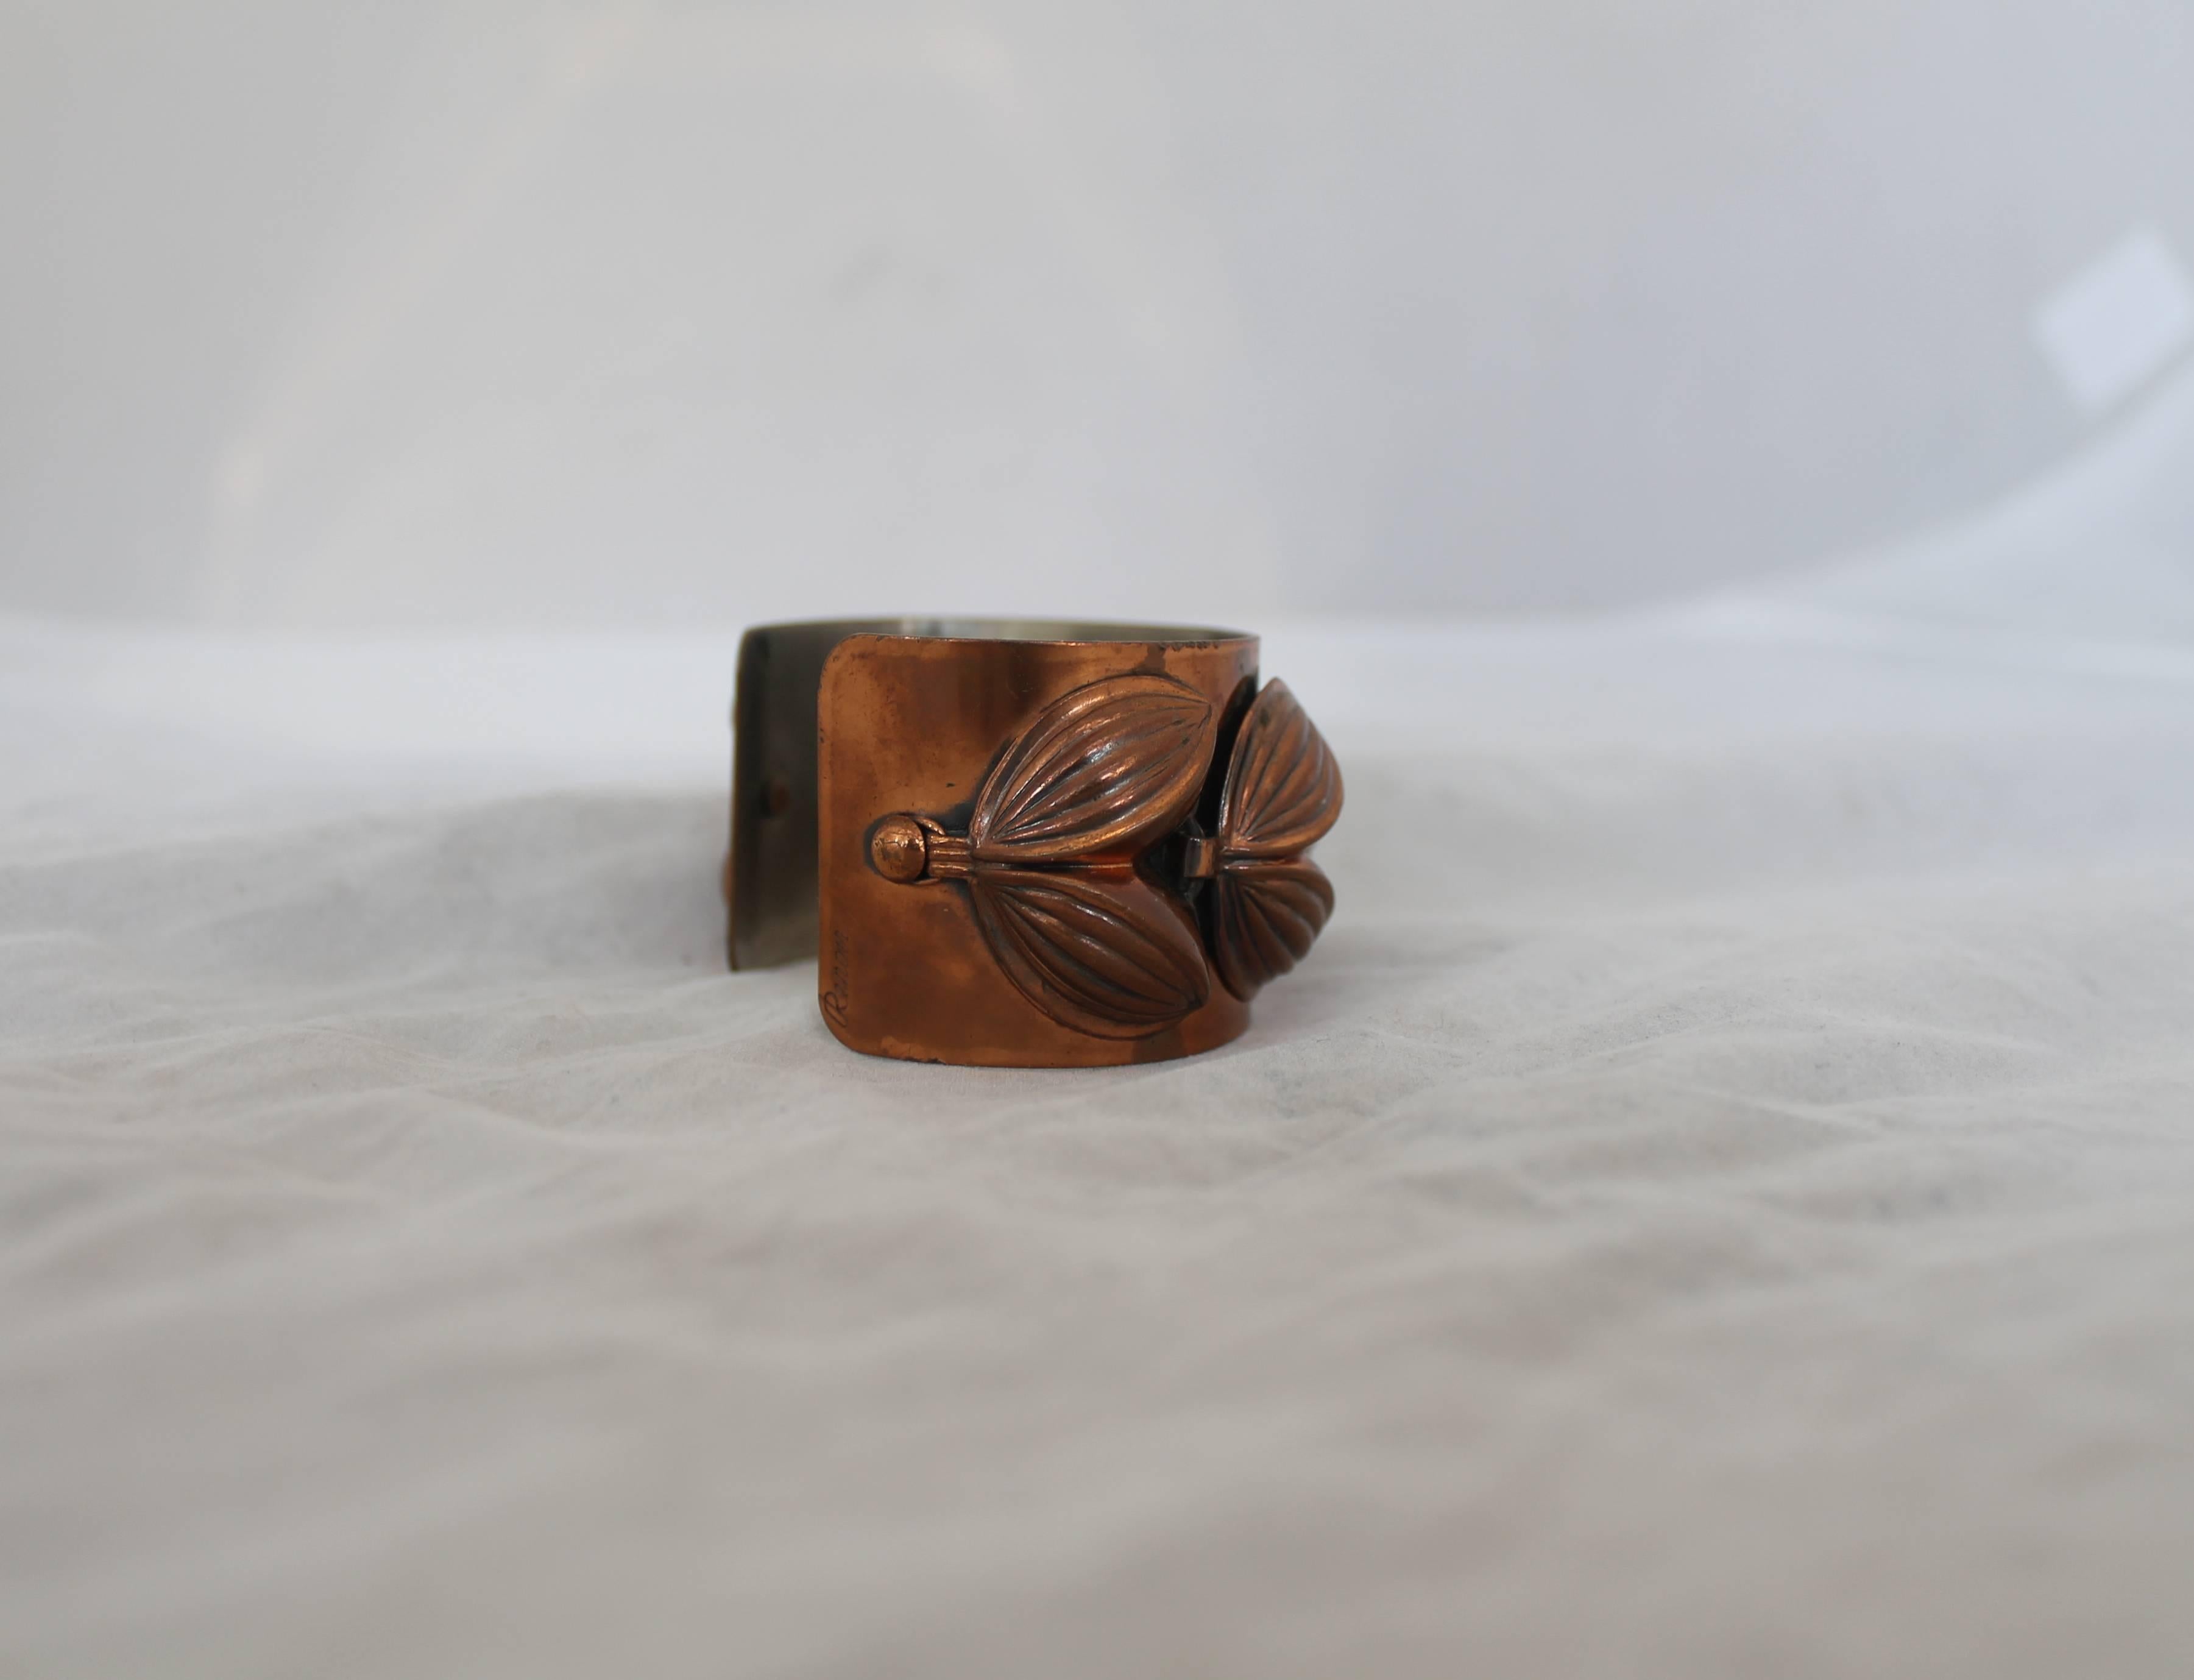 Renoir Vintage Copper Double Leaf Cuff Bracelet - 1950's.  This unique vintage bracelet is in good vintage condition with some wear consistent with its age, such as tarnishing.  It features a double leaf-looking design, the 